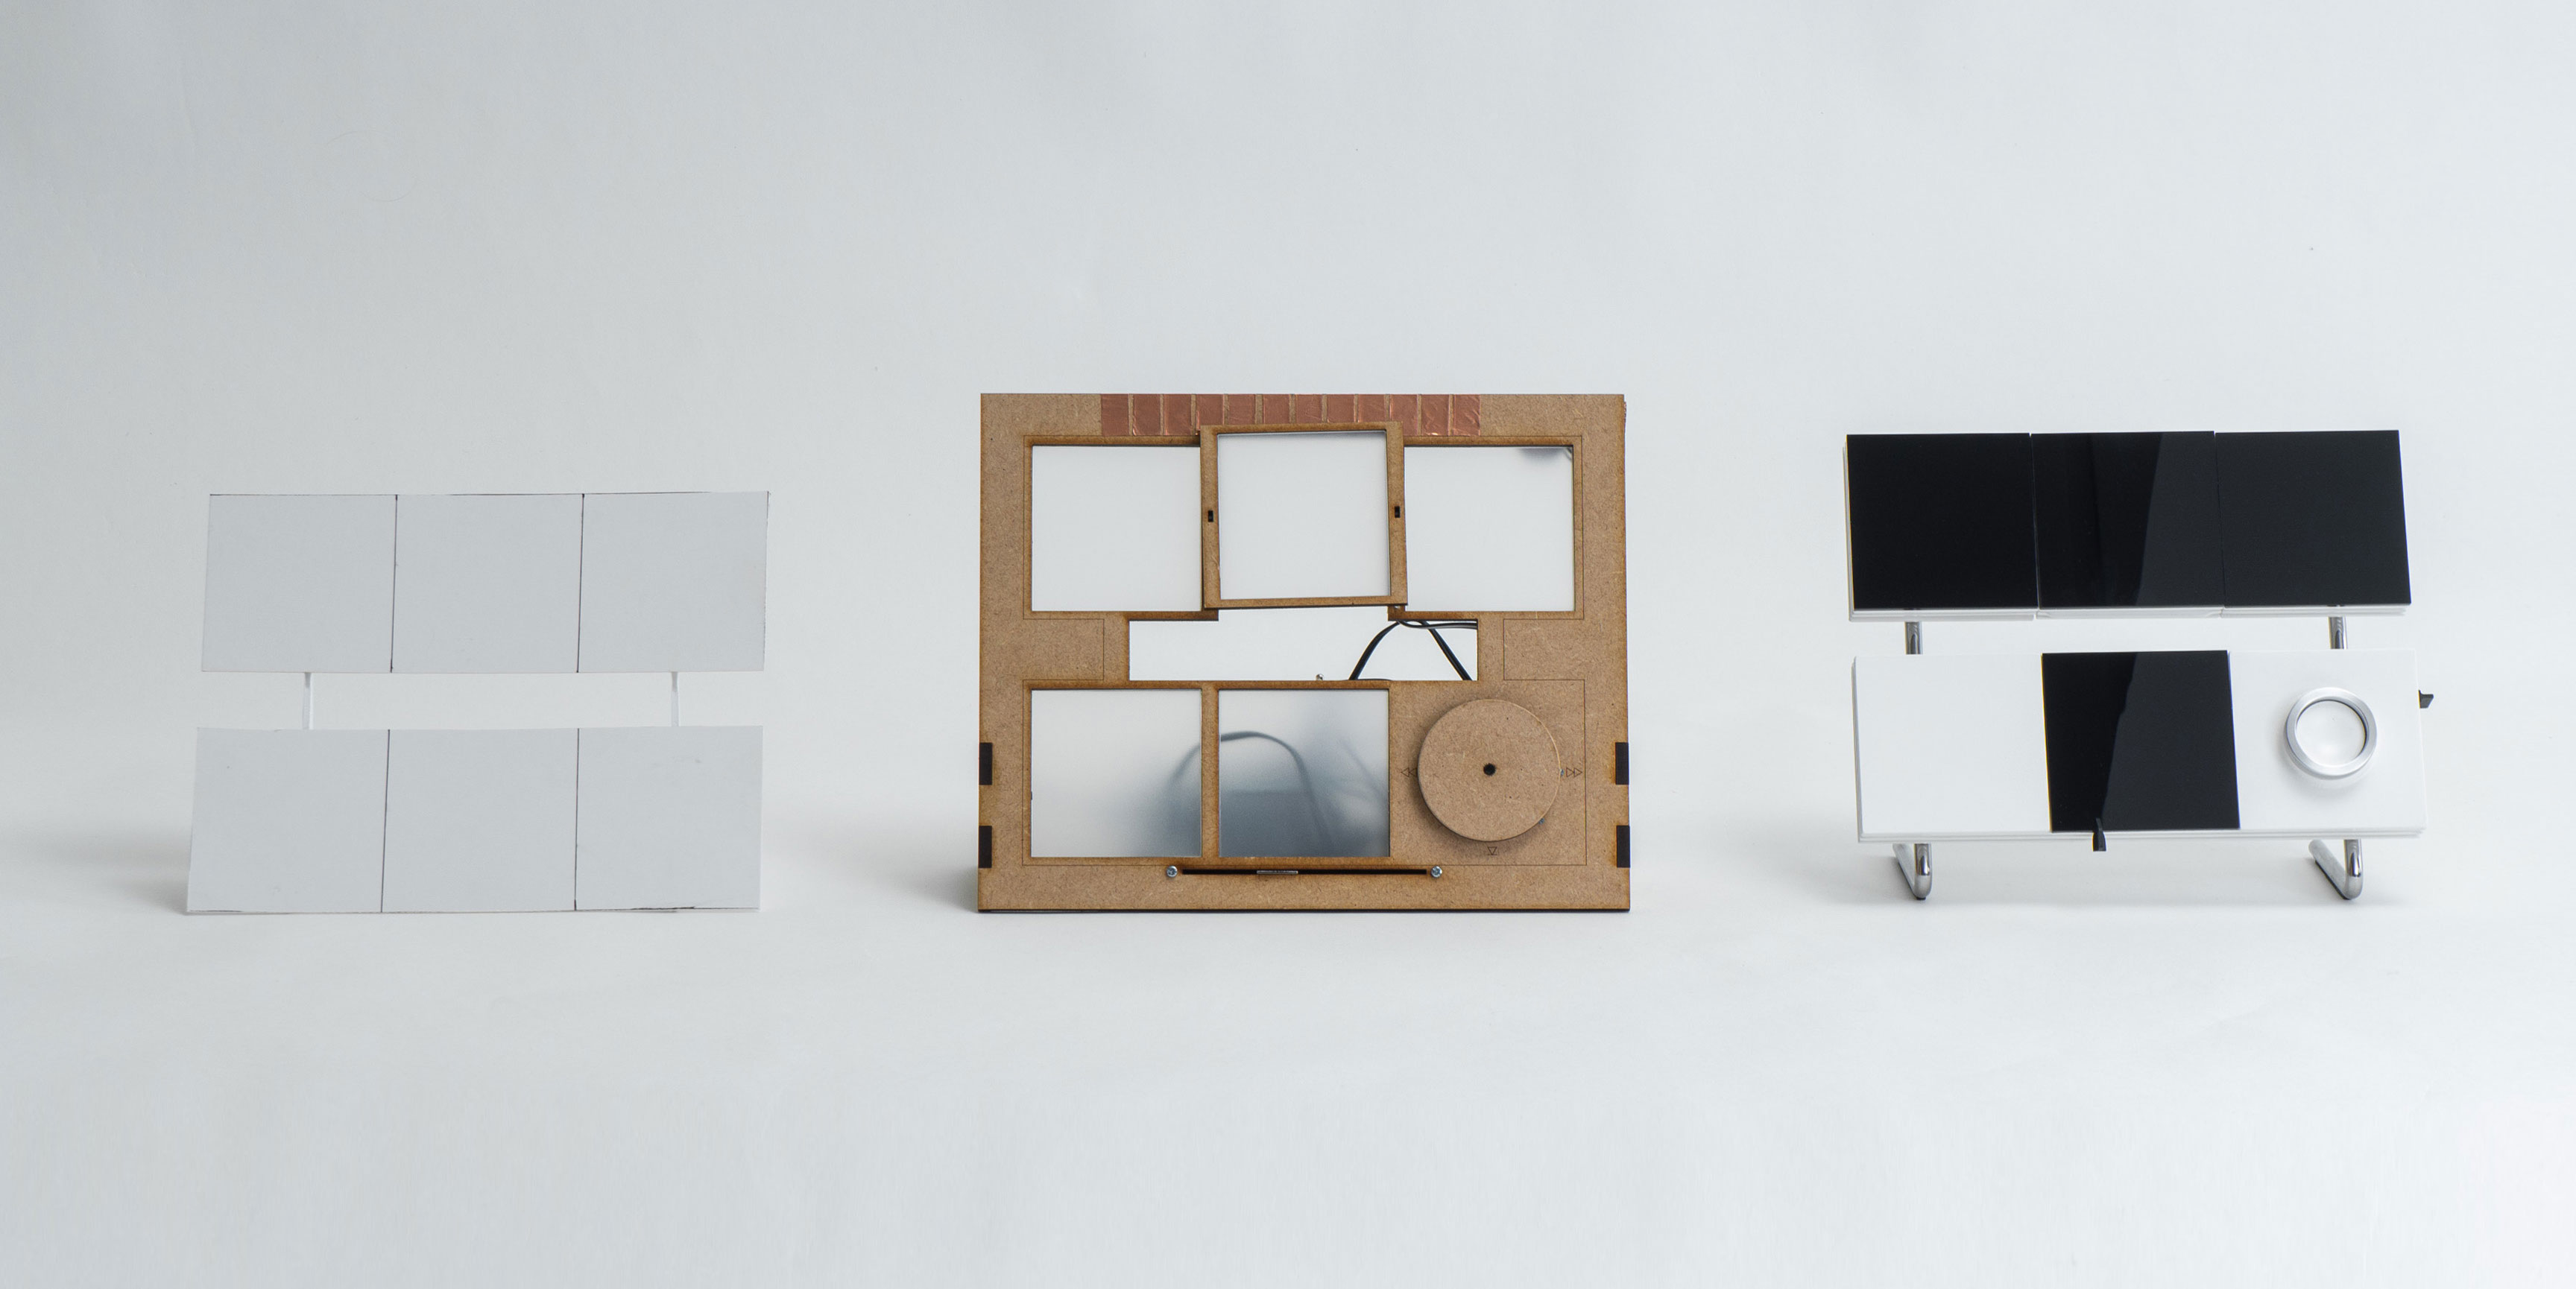 tiles-reintroduces-a-uniquely-memorable-and-engaging-experience-of-analogue-music